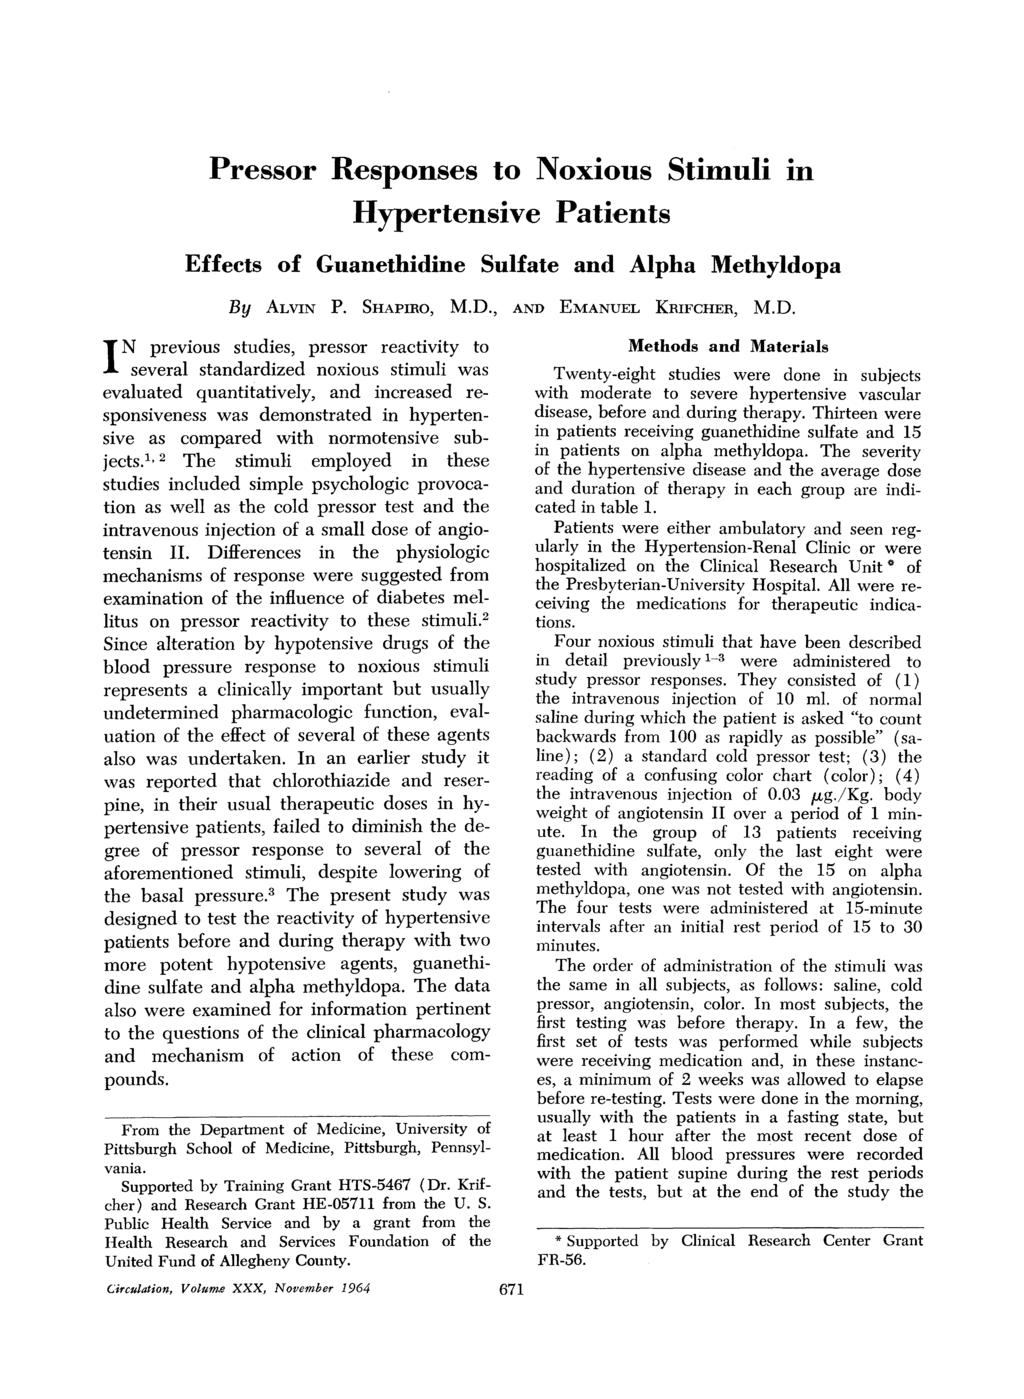 Downloaded from htt://ahajournals.org by on October 2, 2018 Pressor Resonses to Noxious Stimuli in Hyertensive Patients Effects of Guanethidine Sulfate and Alha Methyldoa By ALVIN P. SHAPIRO, M.D., AND EMANUEL KRIFCHER, M.